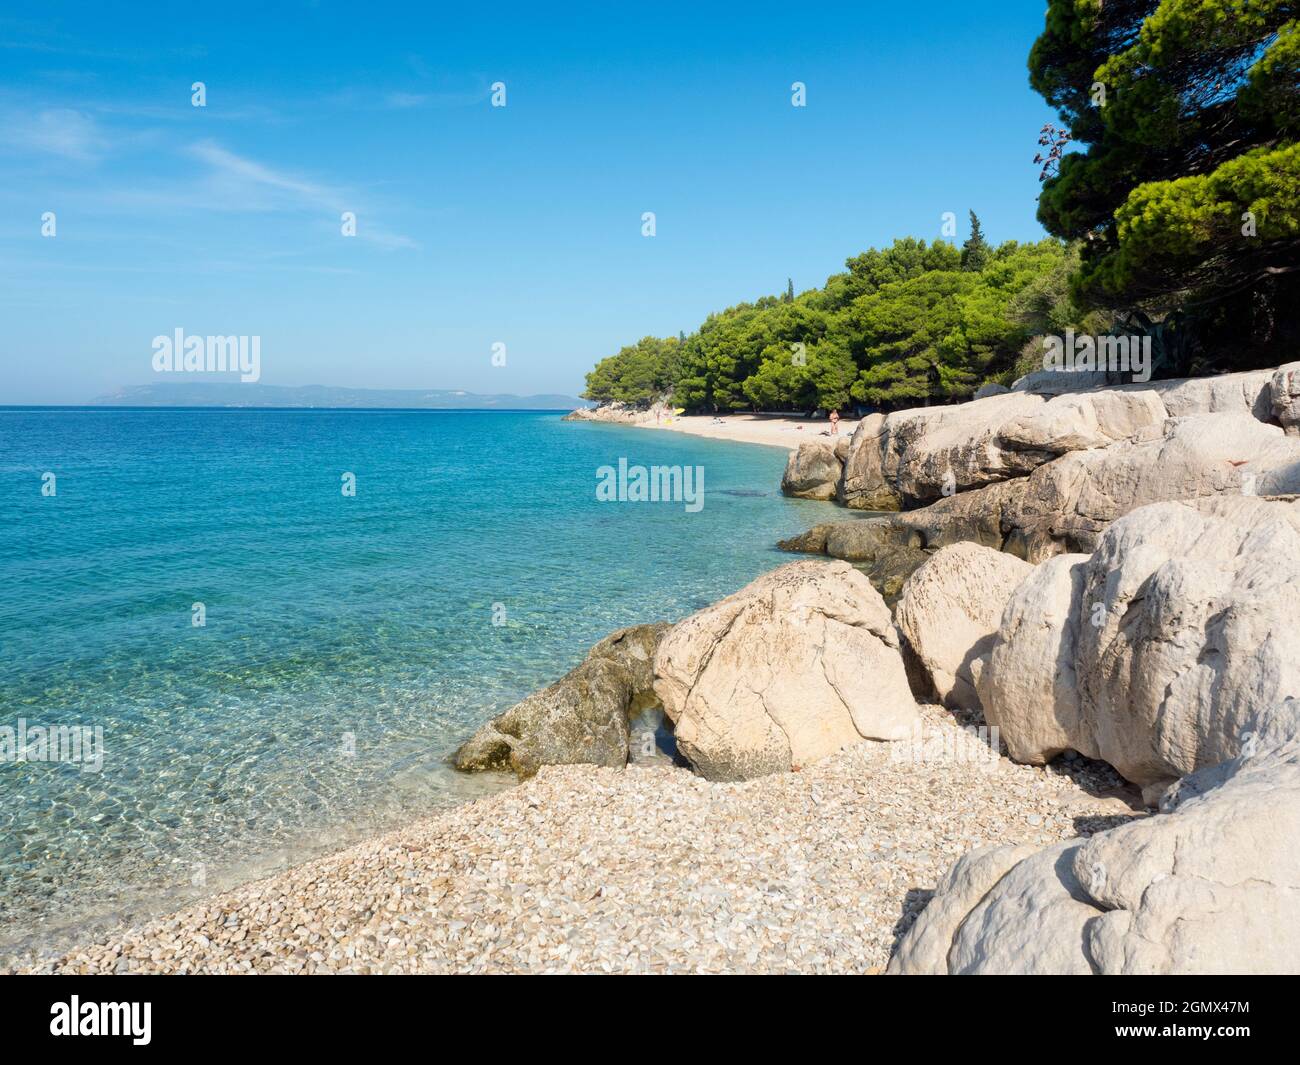 Tucepi, Croatia - 8 September 2016; people in view. Tucepi is a small seaside town in the Split-Dalmatia County of Croatia. It is located on the Adria Stock Photo